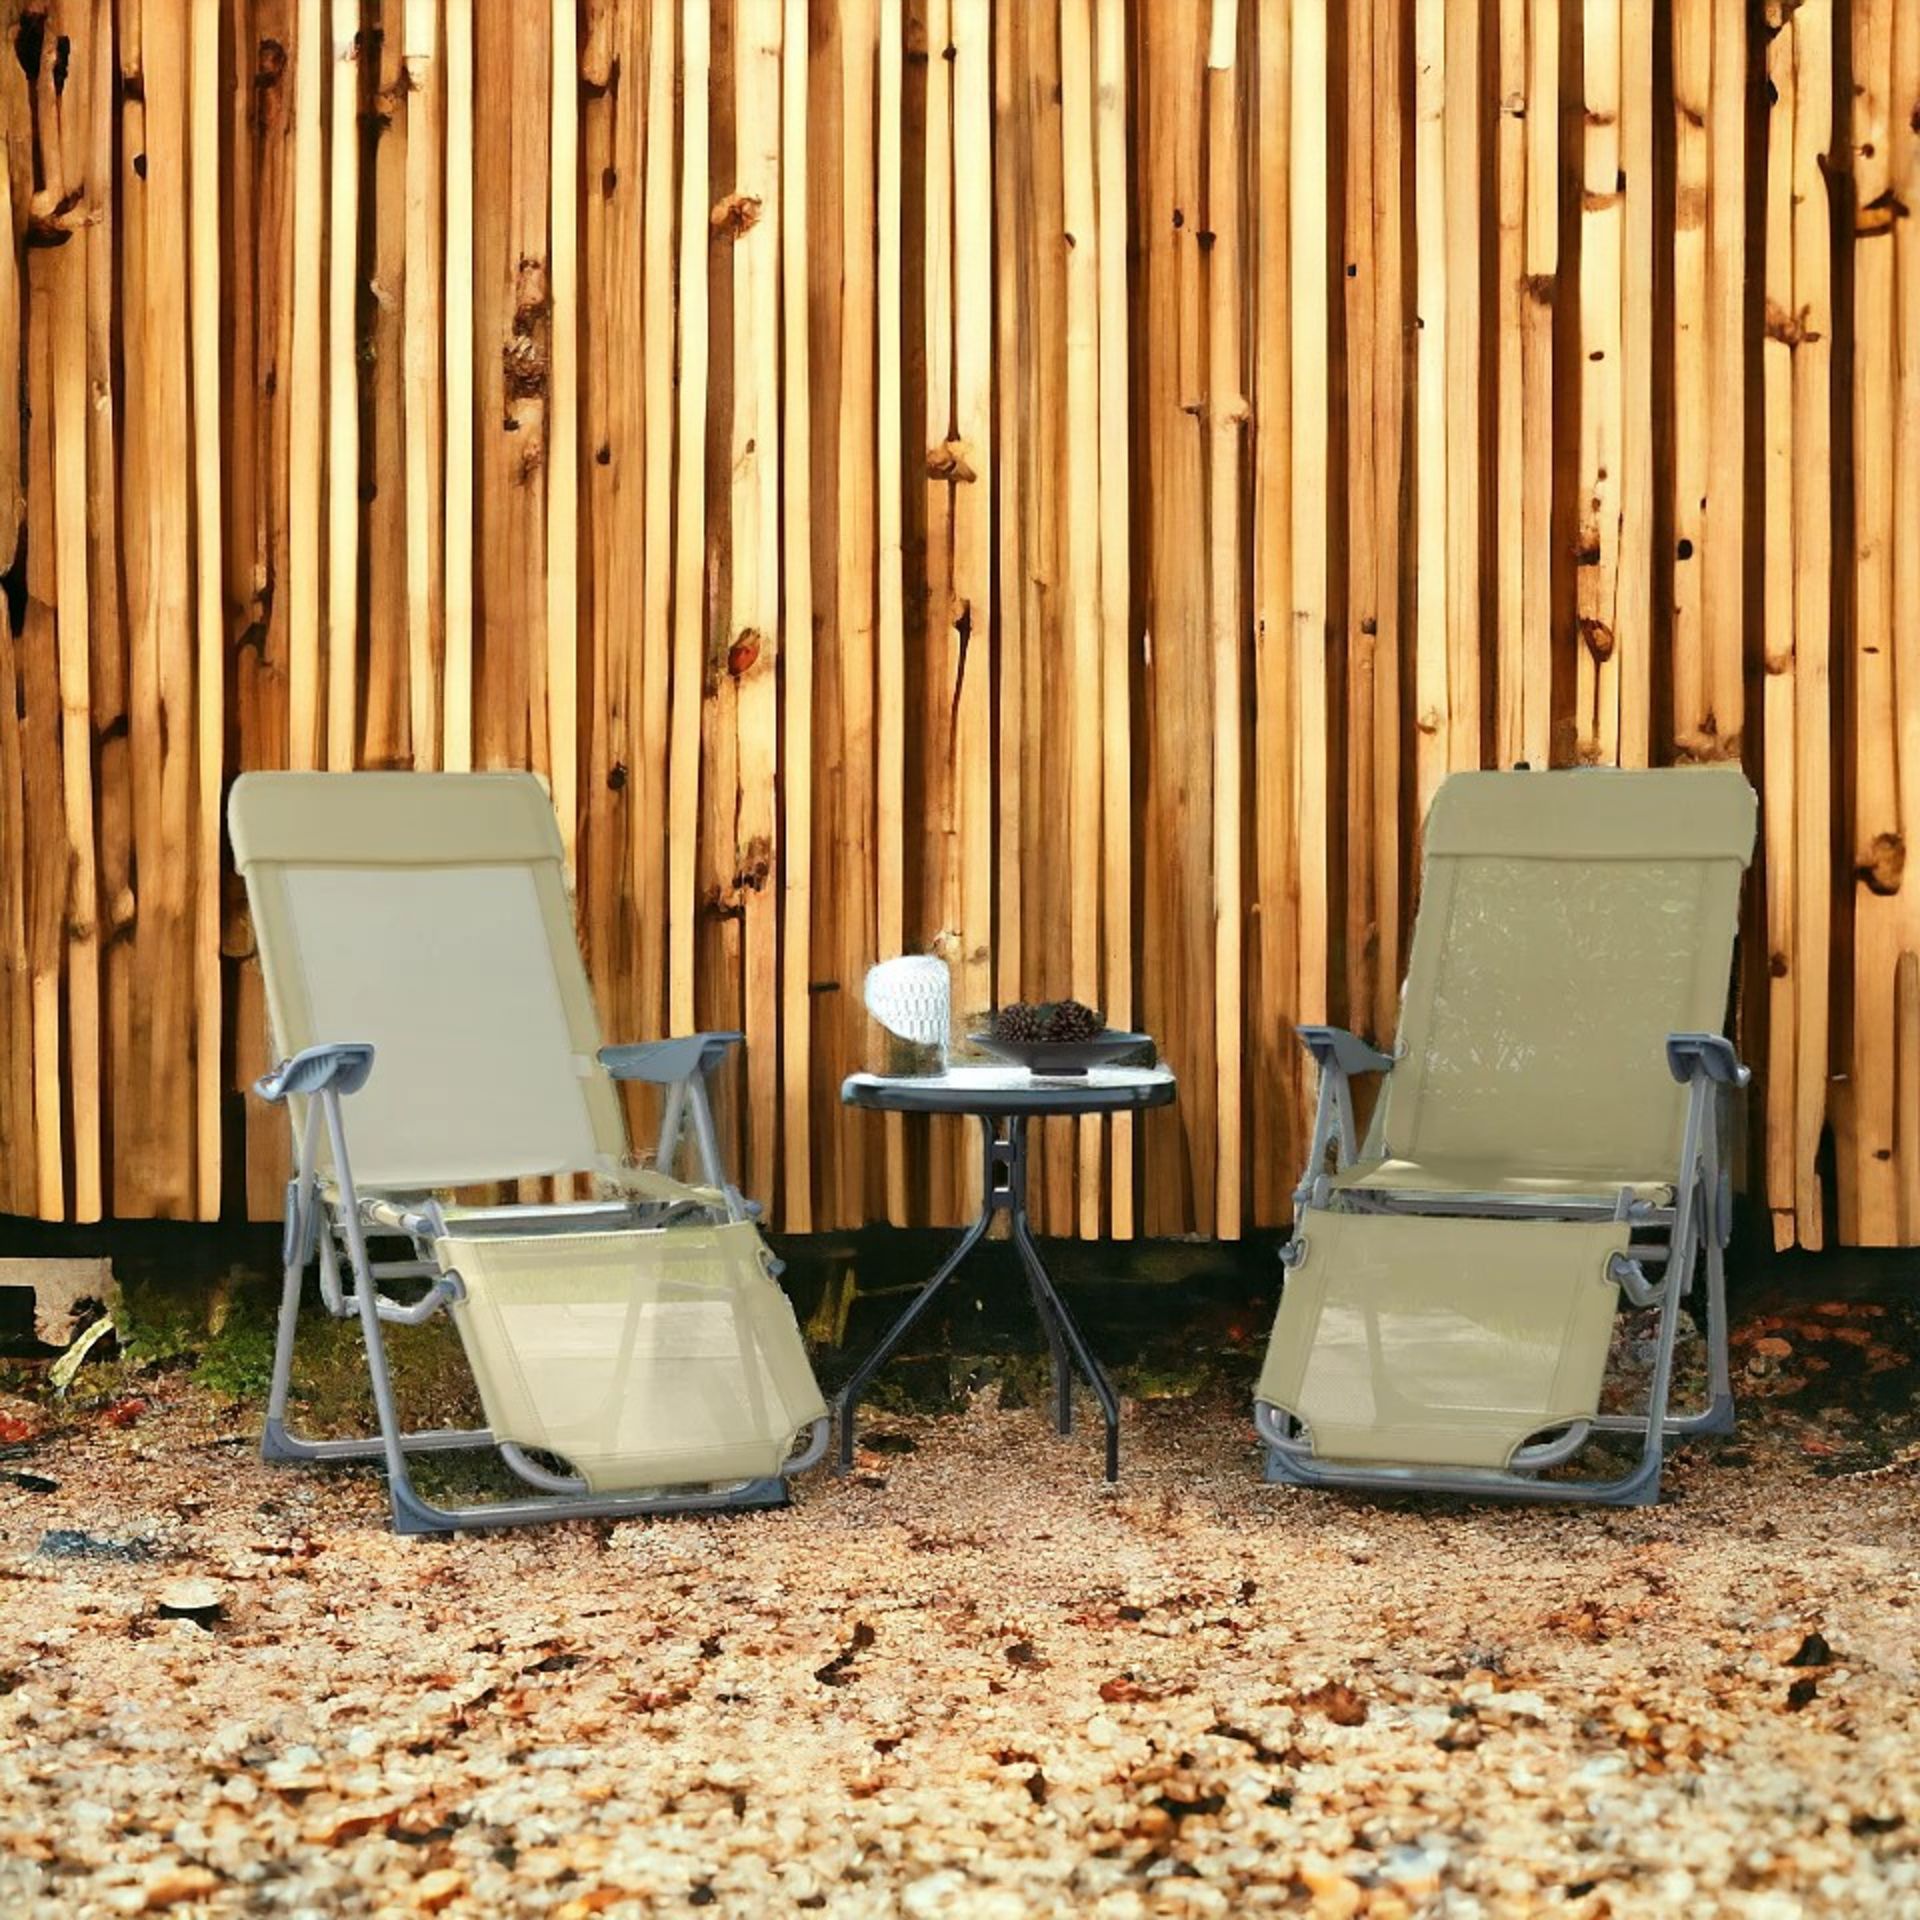 FREE DELIVERY -BRAND NEW RECLINING GARDEN CHAIRS SET OF 2 W/ 5-LEVEL ADJUSTABLE BACKREST, BEIGE - Image 2 of 2